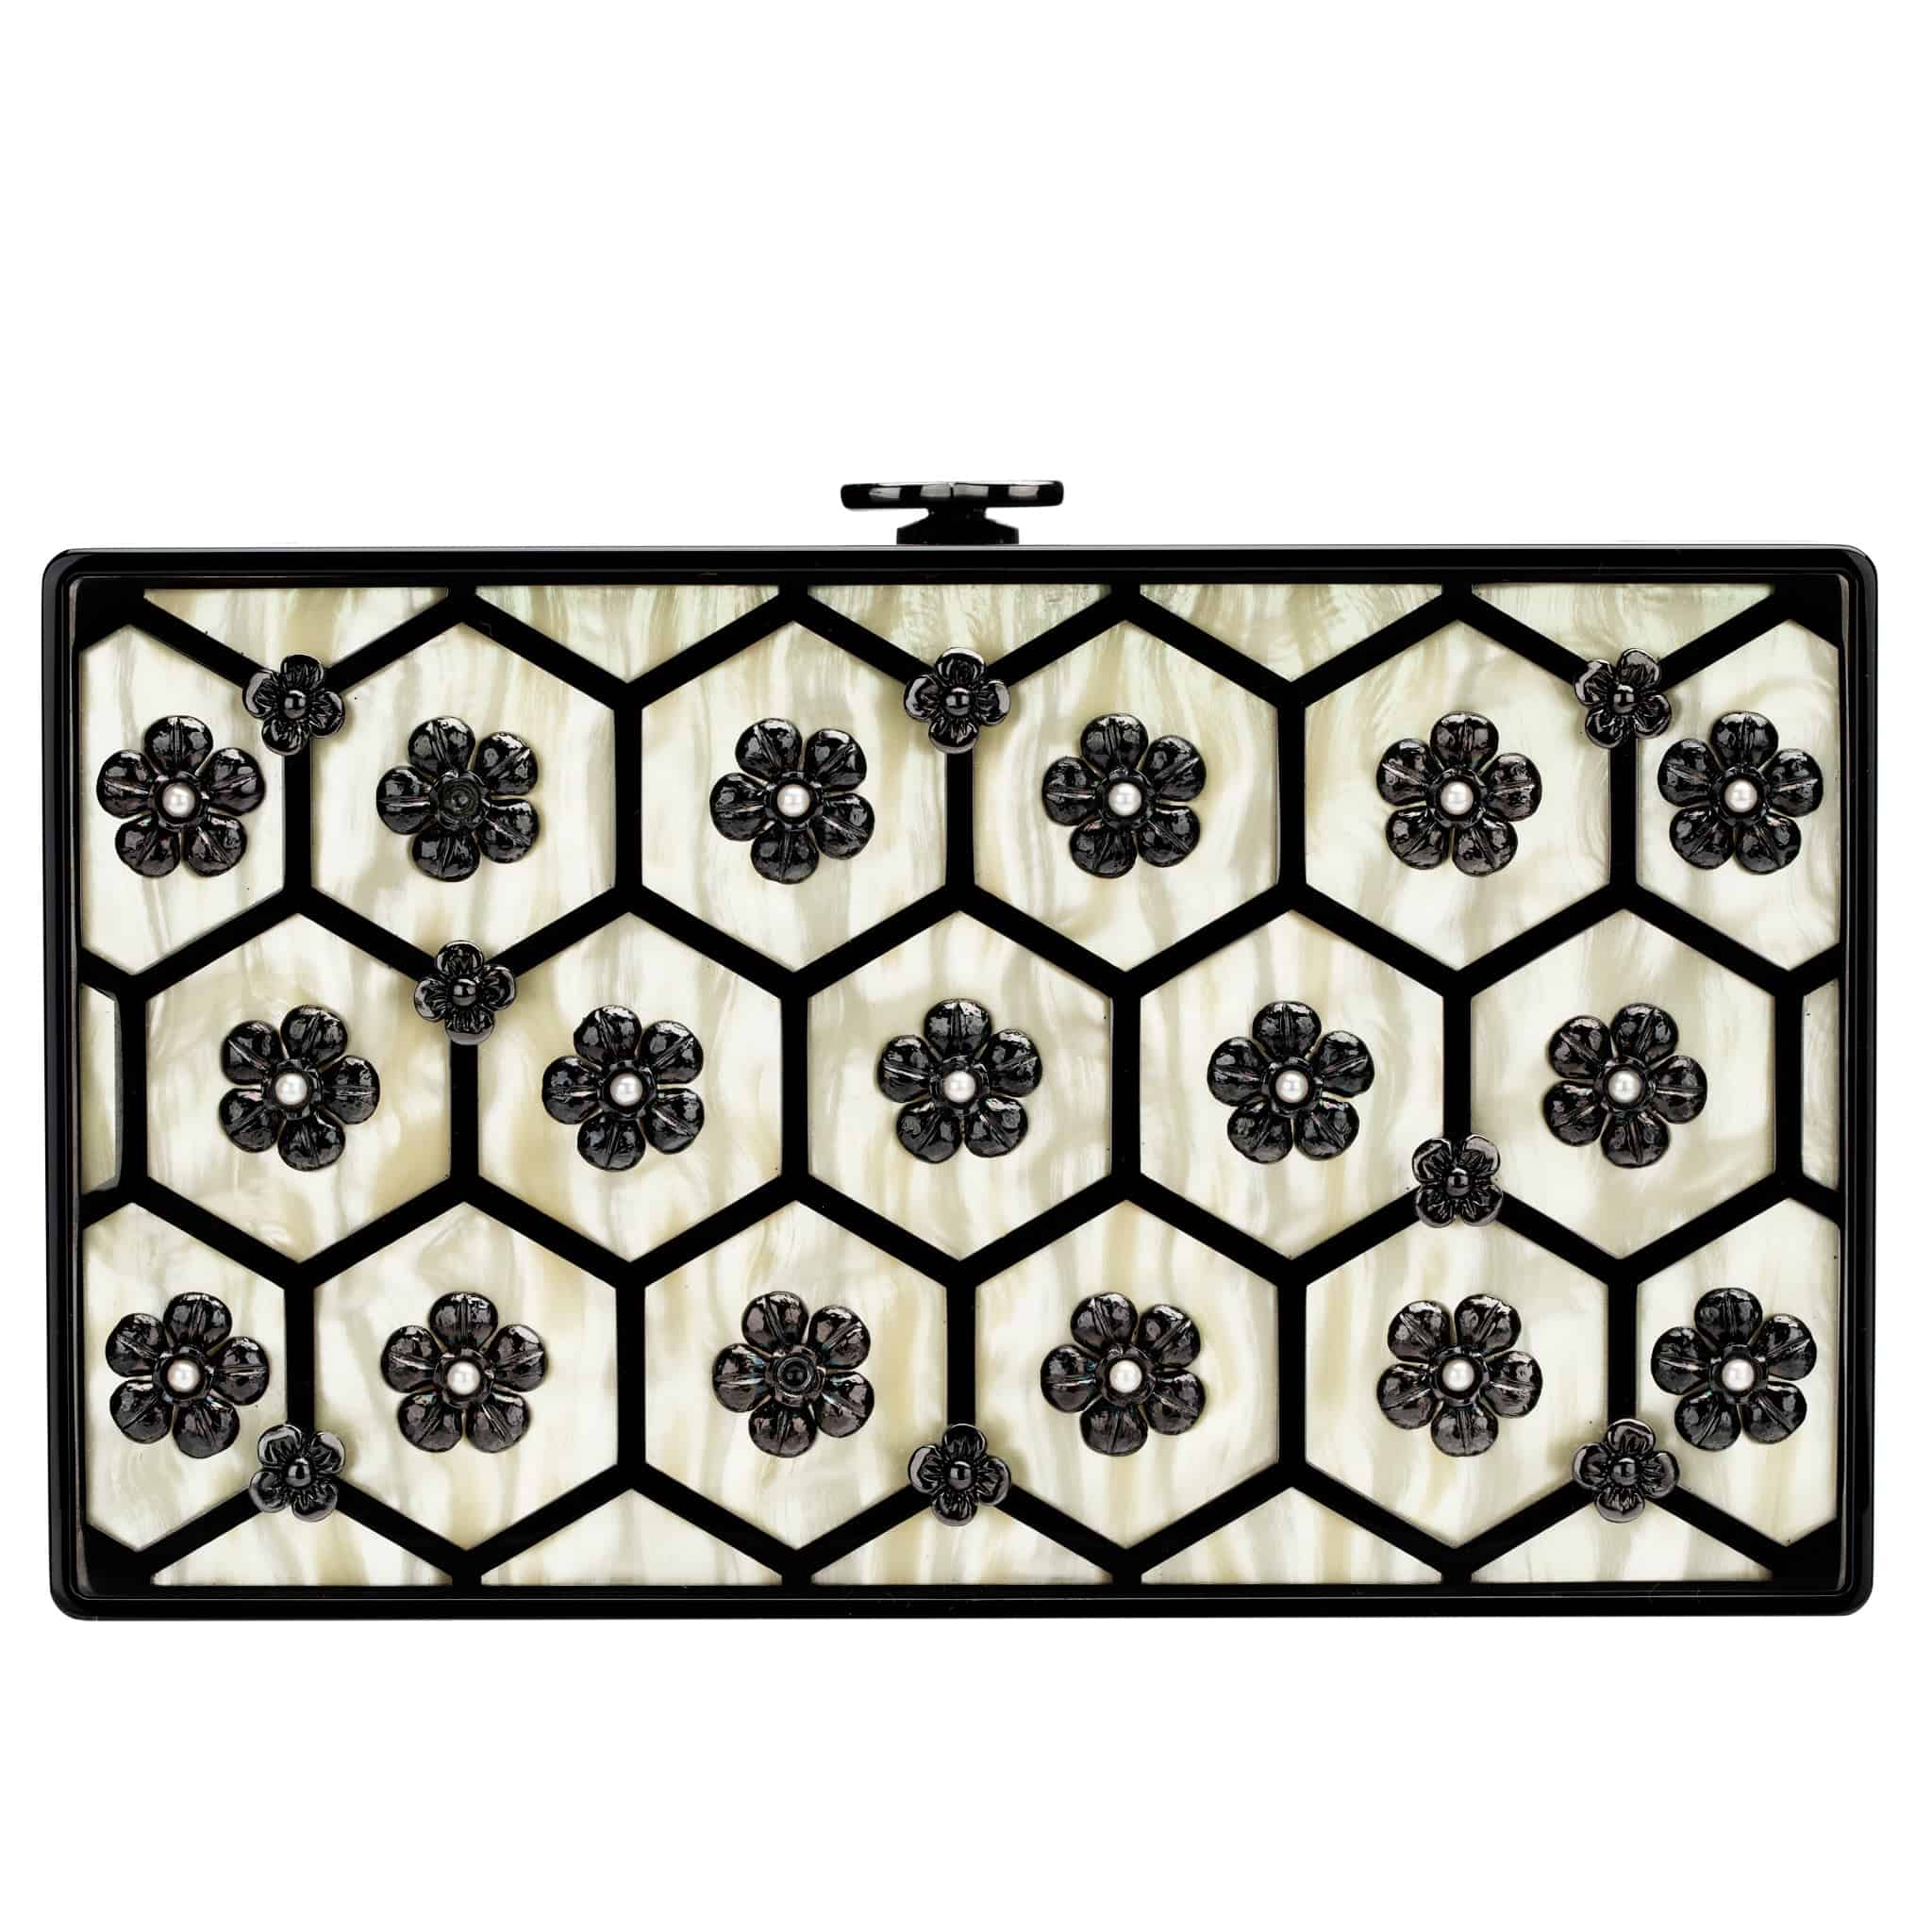 CHANEL MINAUDIÈRE LIMITED EDITION MOTHER-OF-PEARL BLACK HARDWARW - On Repeat